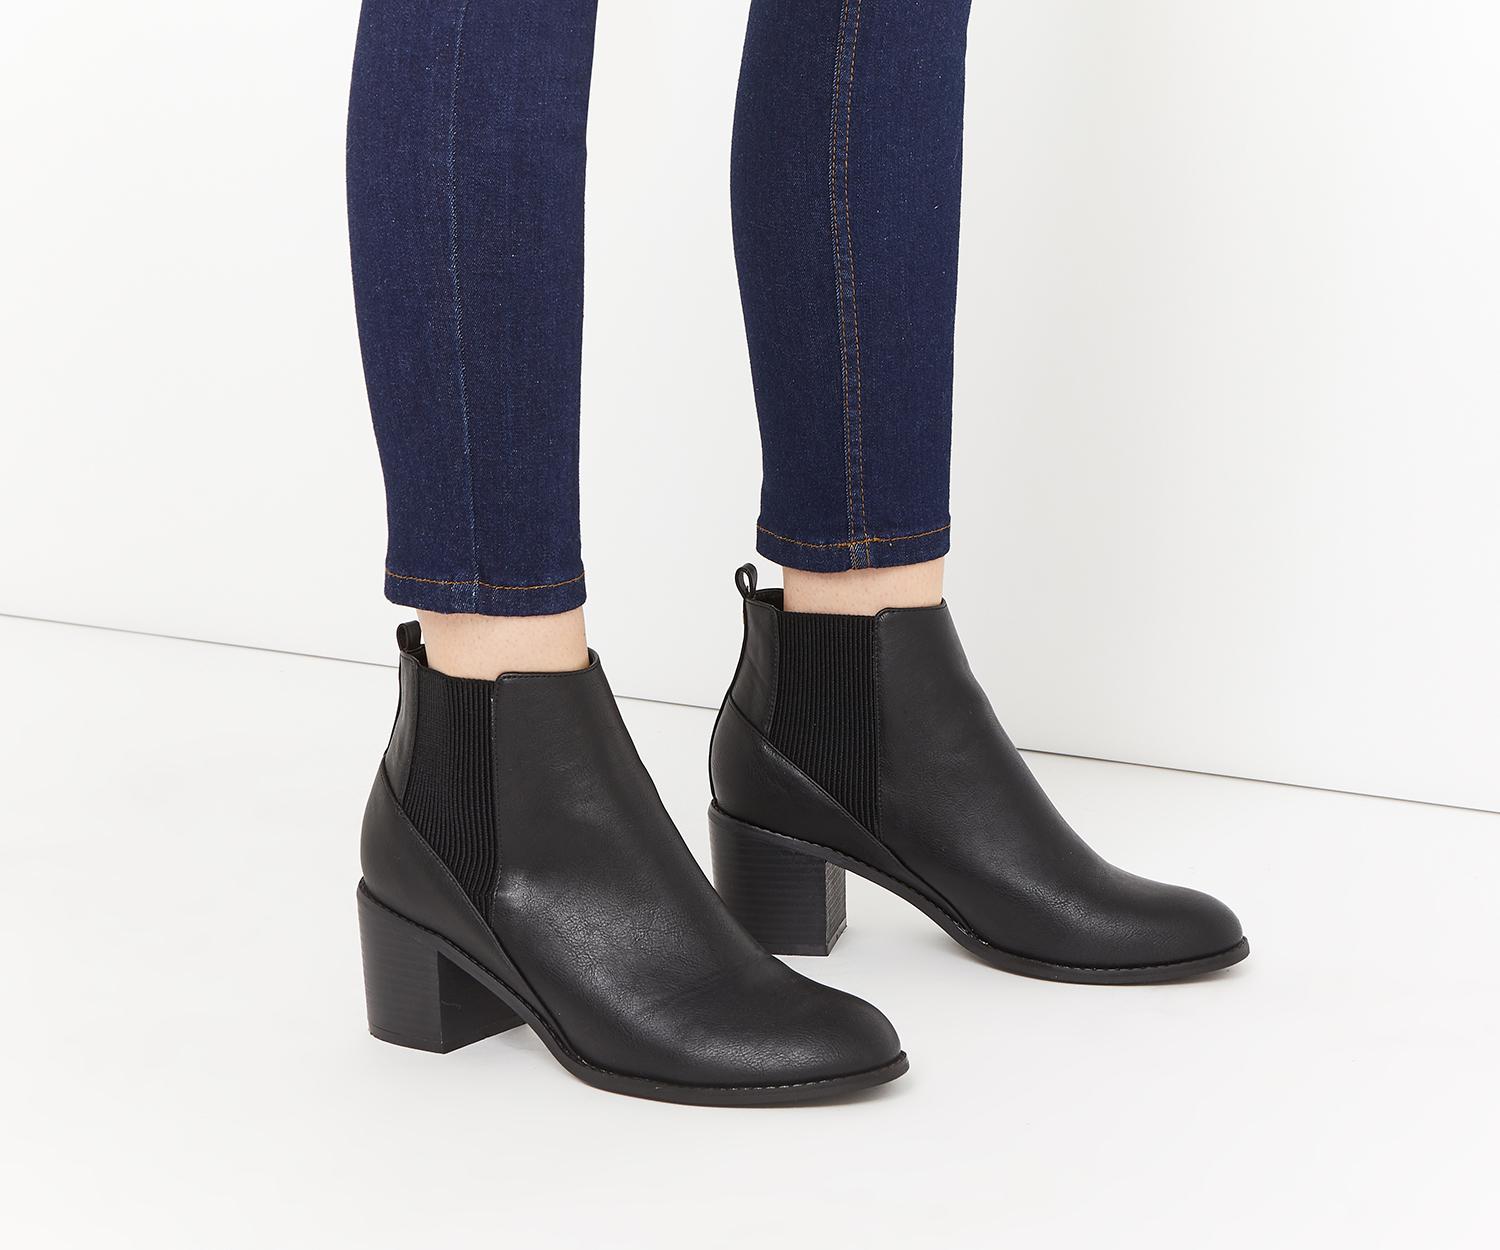 Lyst - Oasis Frankie Casual Boot in Black